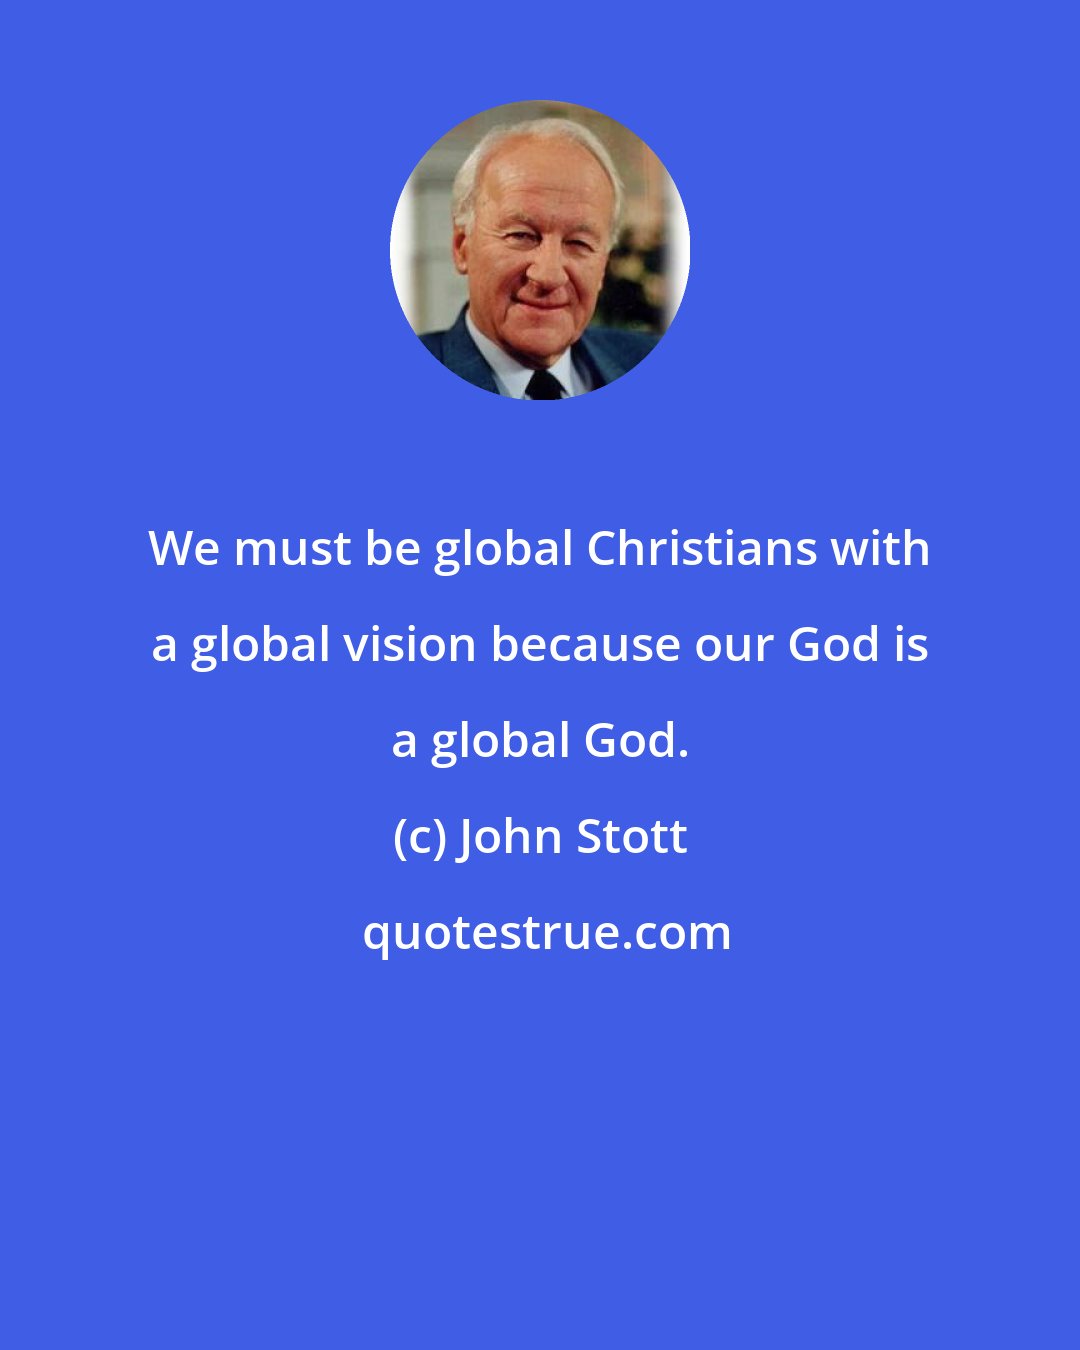 John Stott: We must be global Christians with a global vision because our God is a global God.